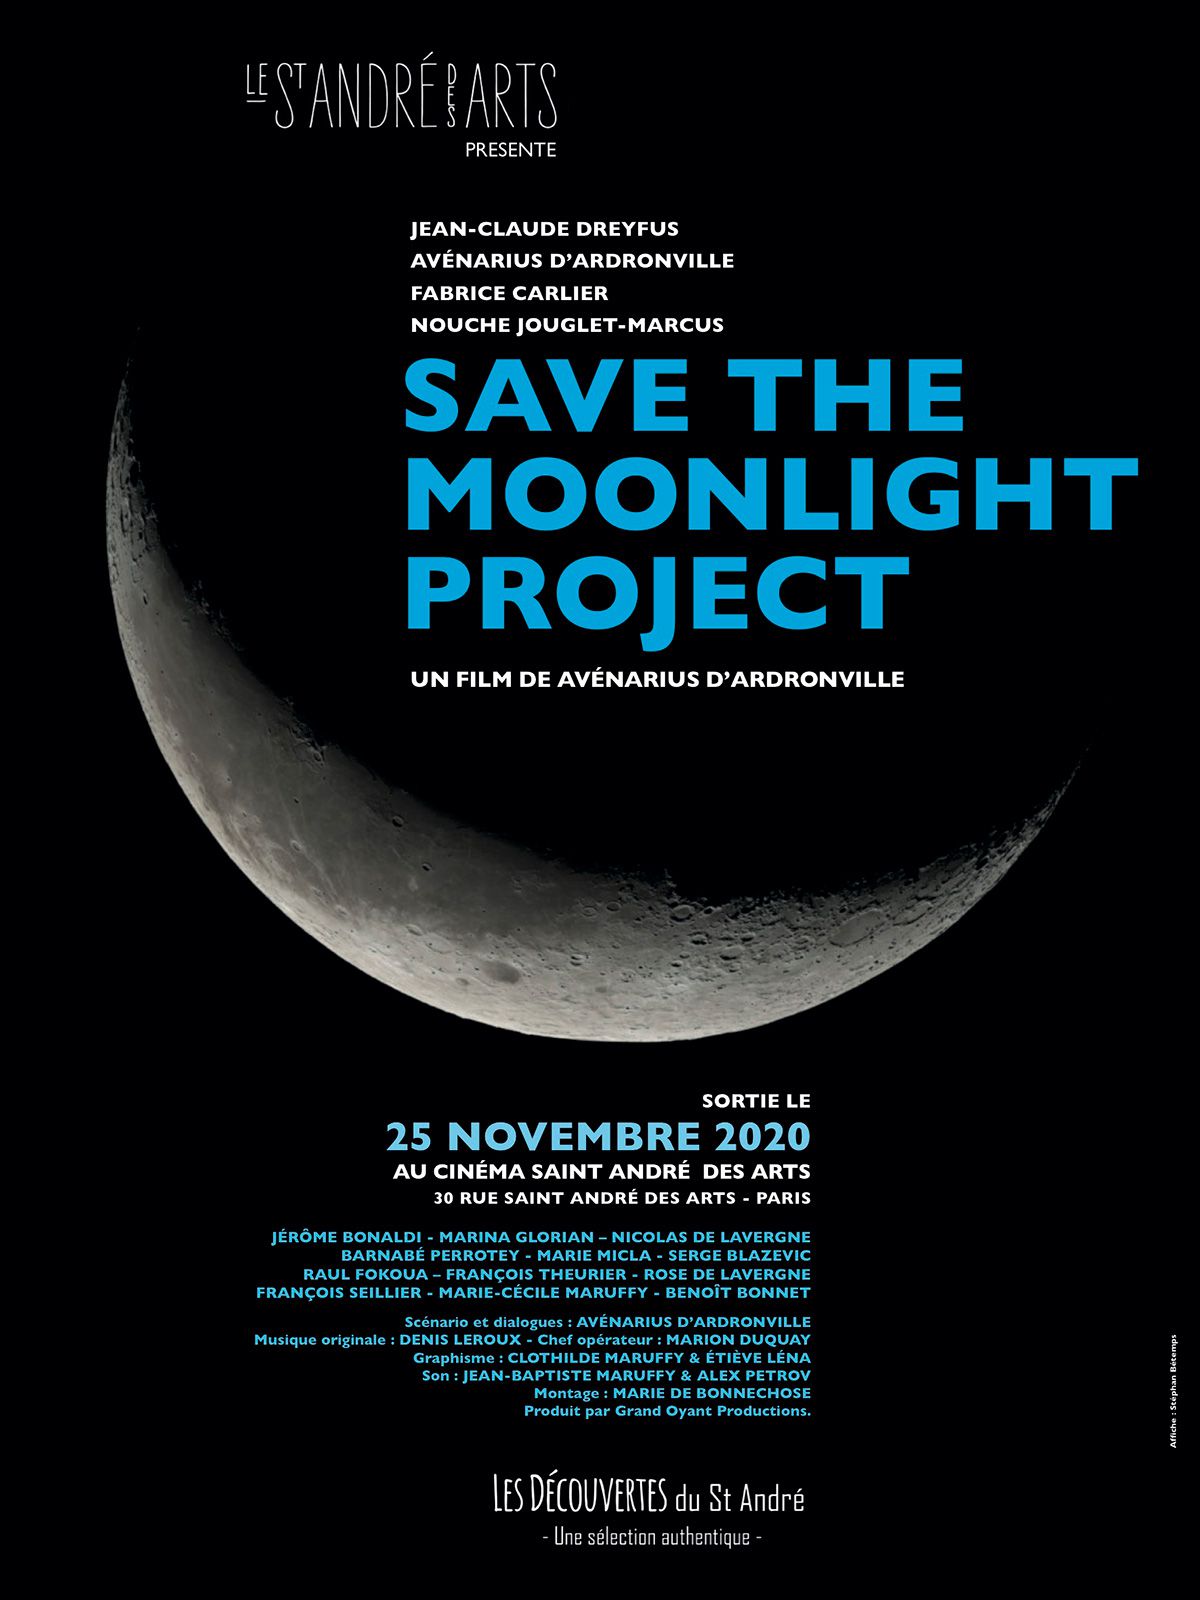 Save the moonlight project - Film (2020)